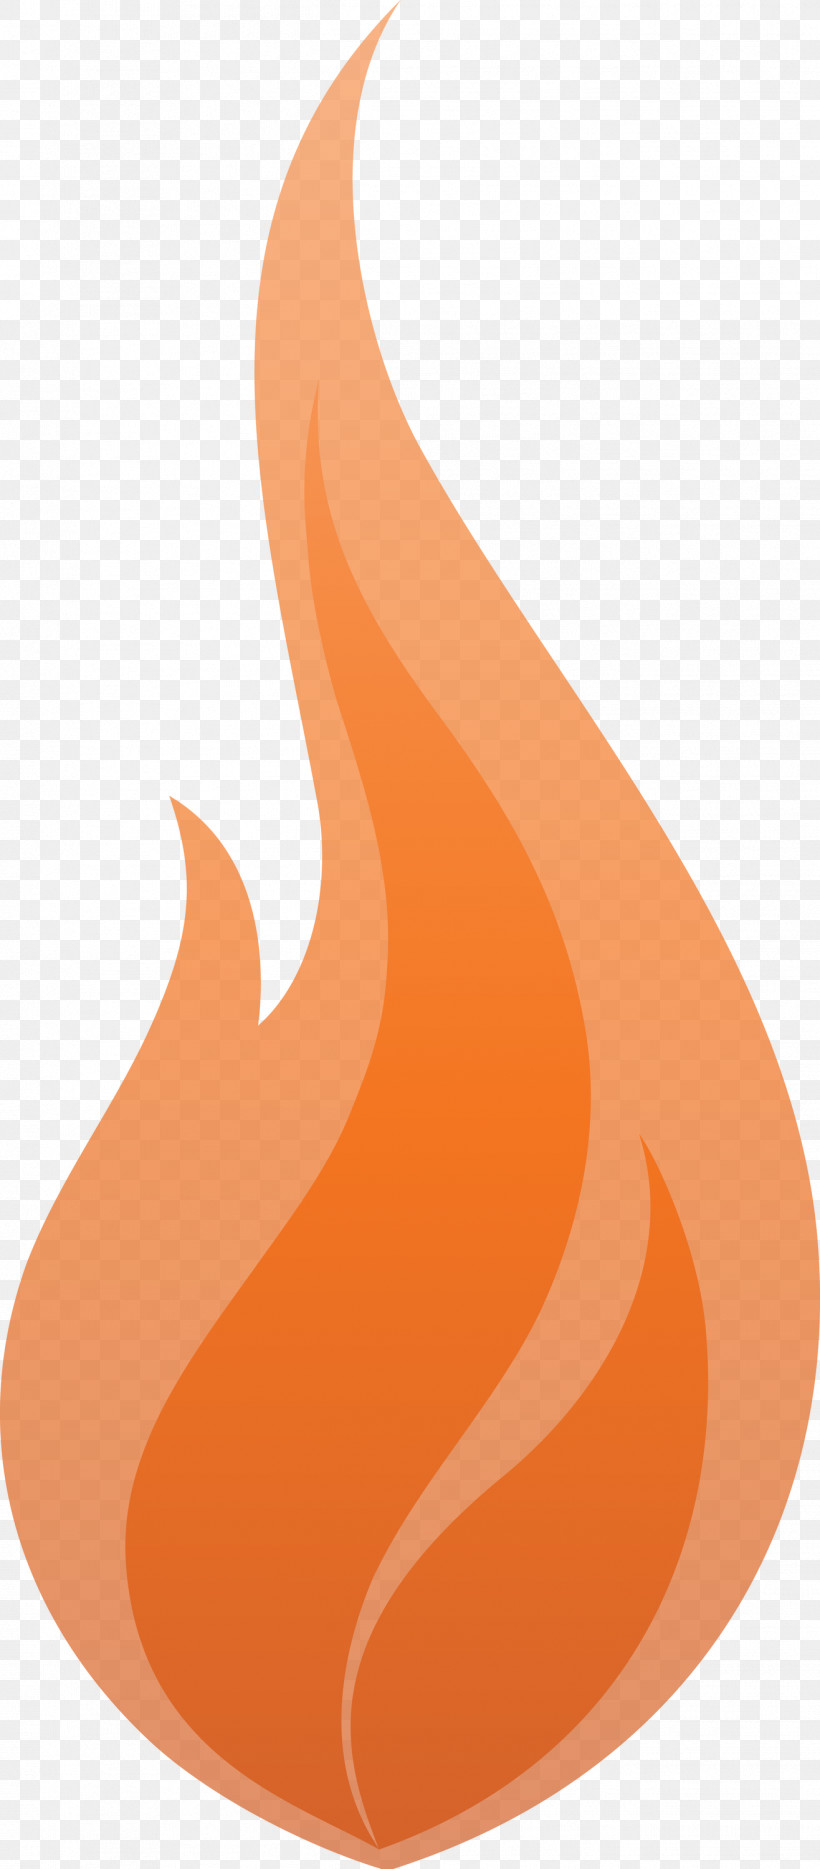 Fire Flame, PNG, 1316x3000px, Fire, Flame, Pumpkin, Squash Download Free